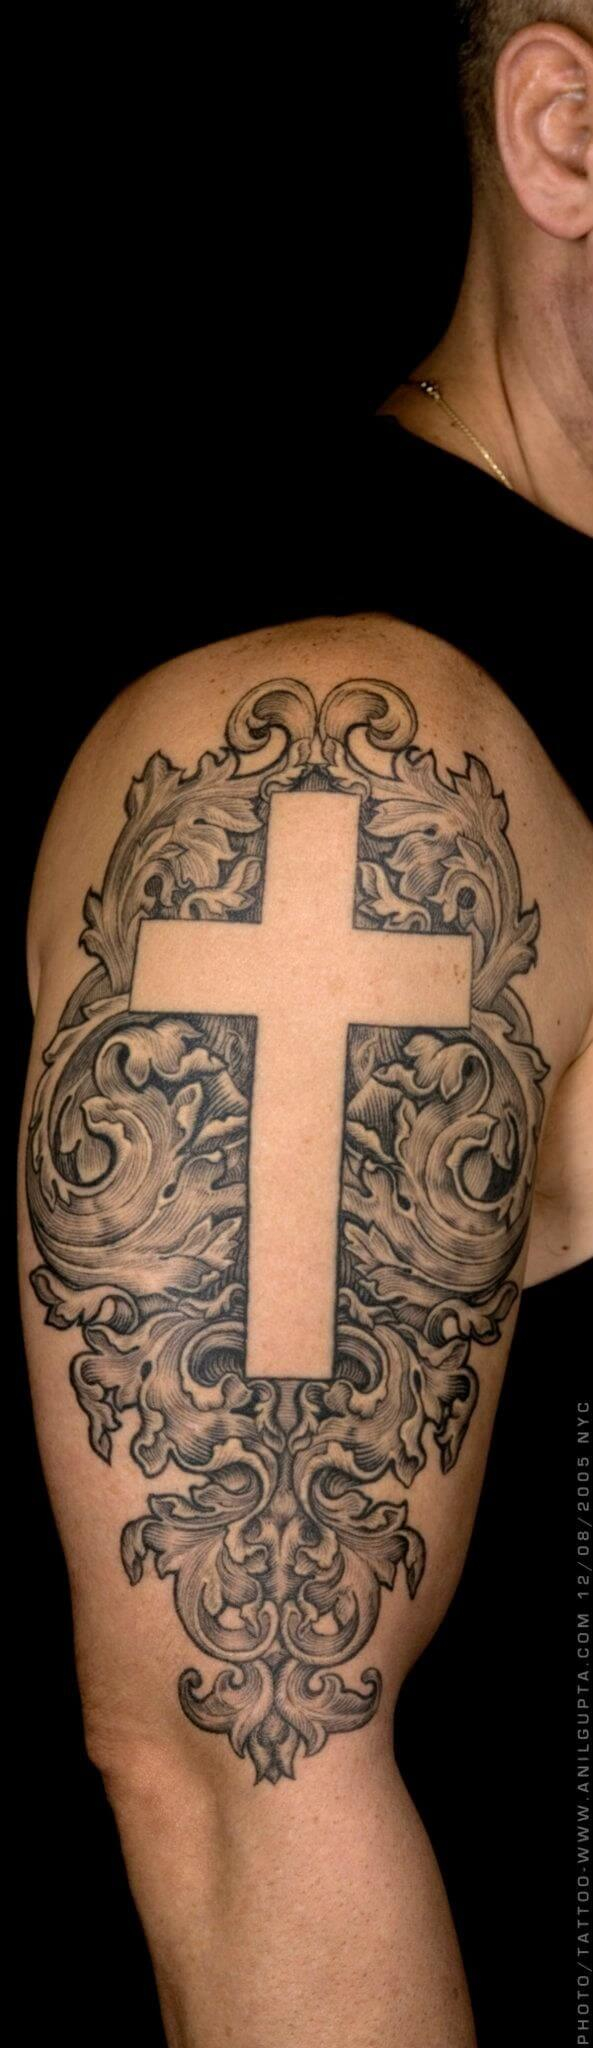 56 Best Cross Tattoos For Men Improb pertaining to sizing 593 X 2048